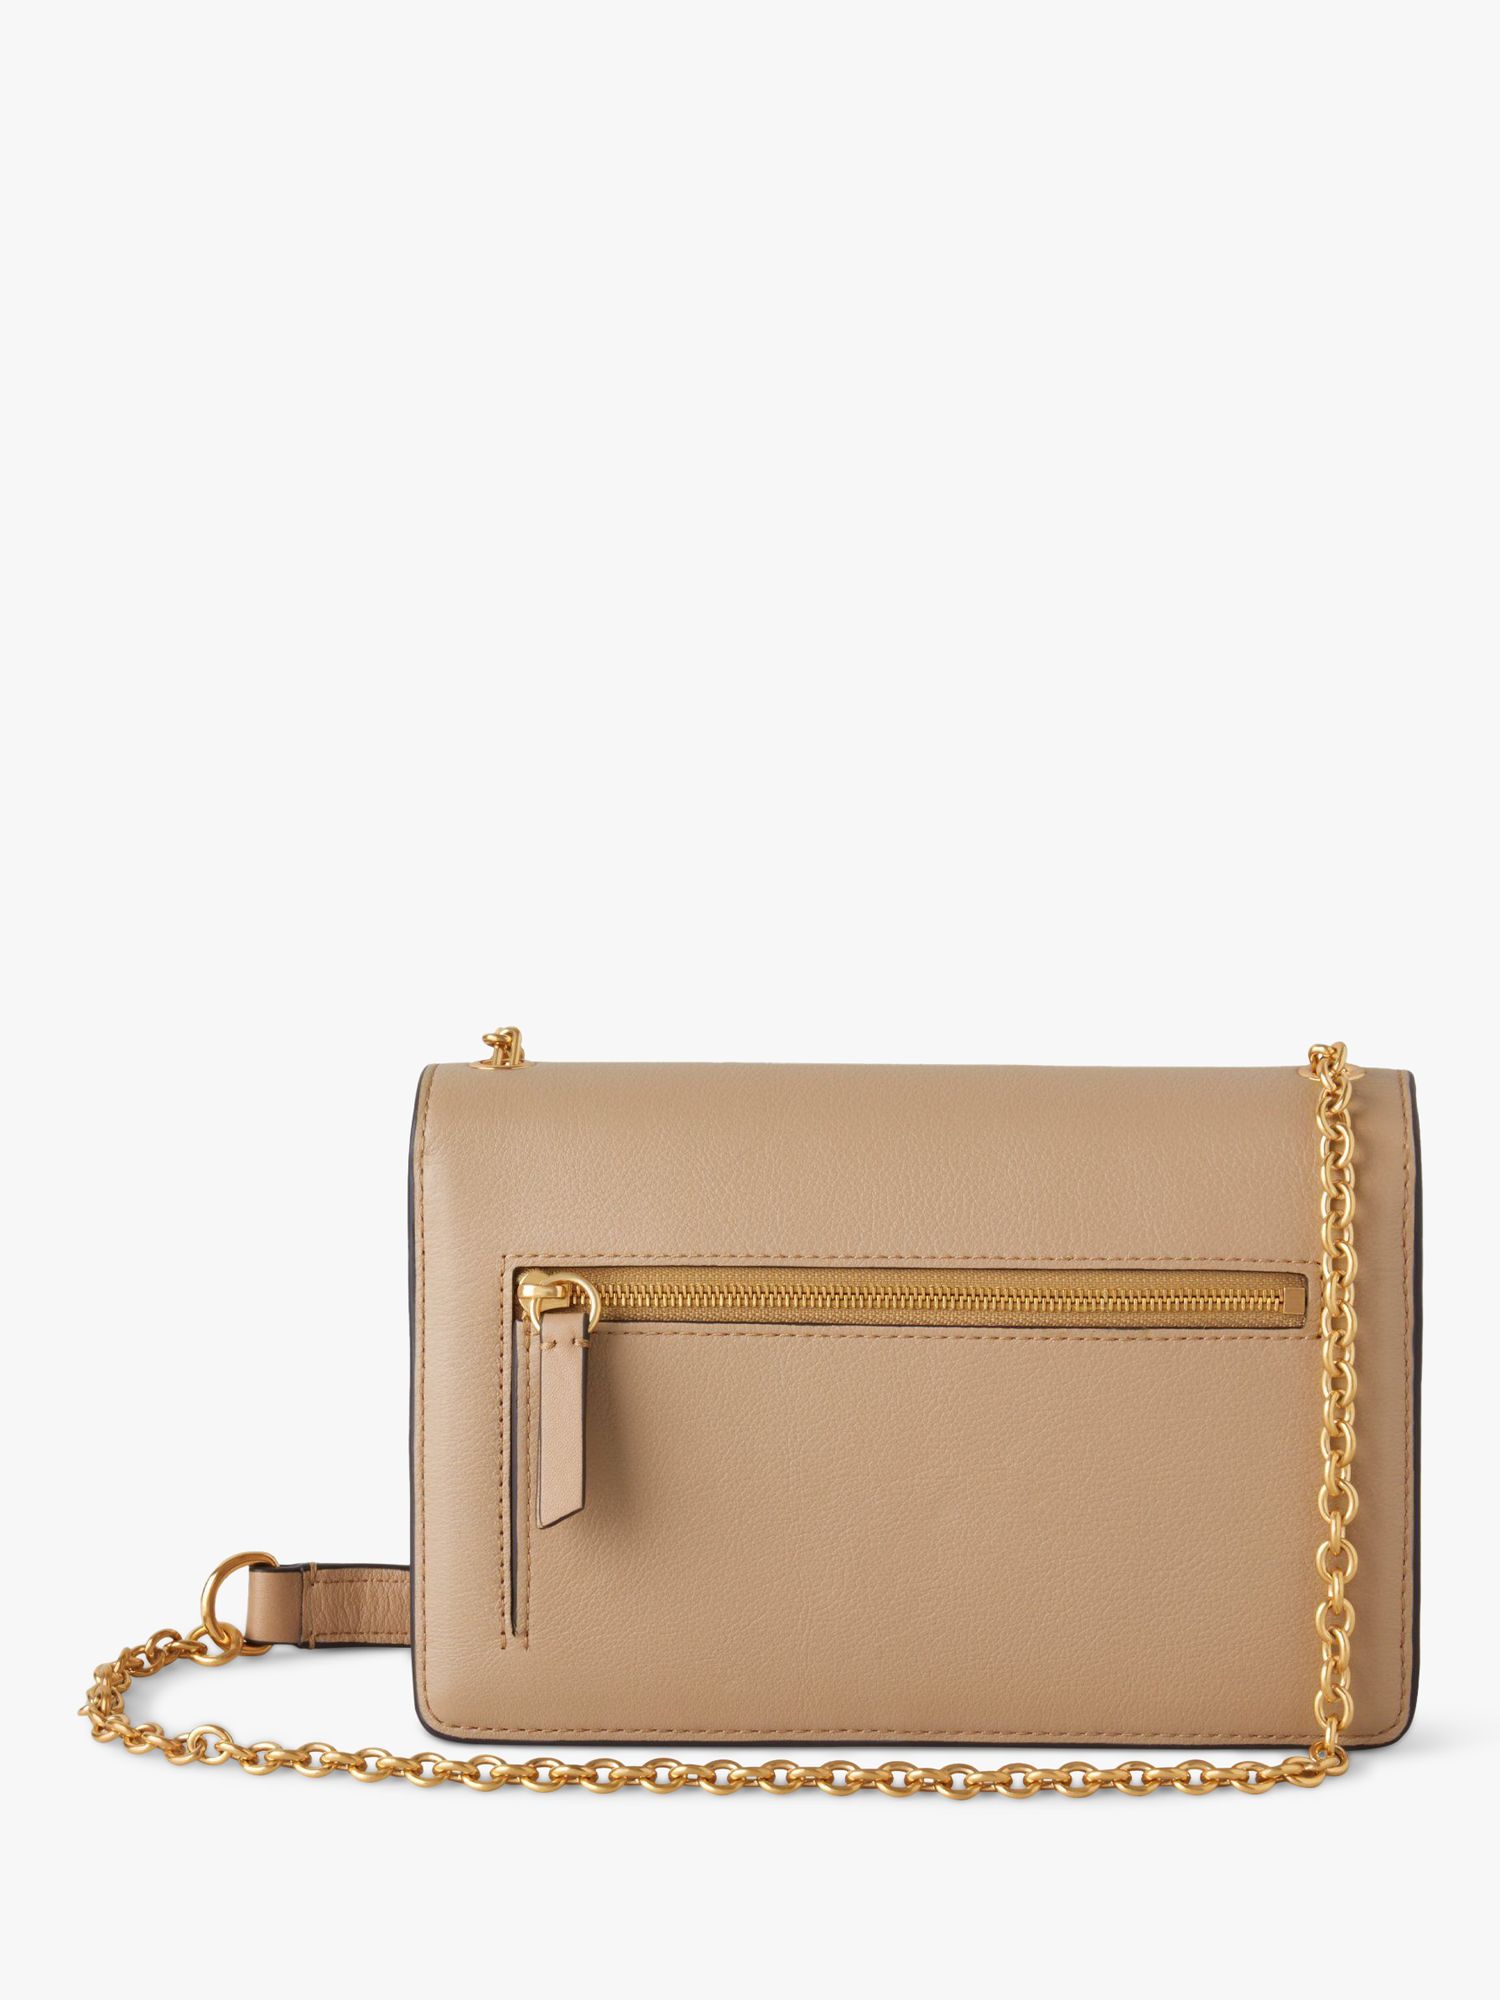 Mulberry Small Darley Silky Calf Leather Cross Body Bag, Maple